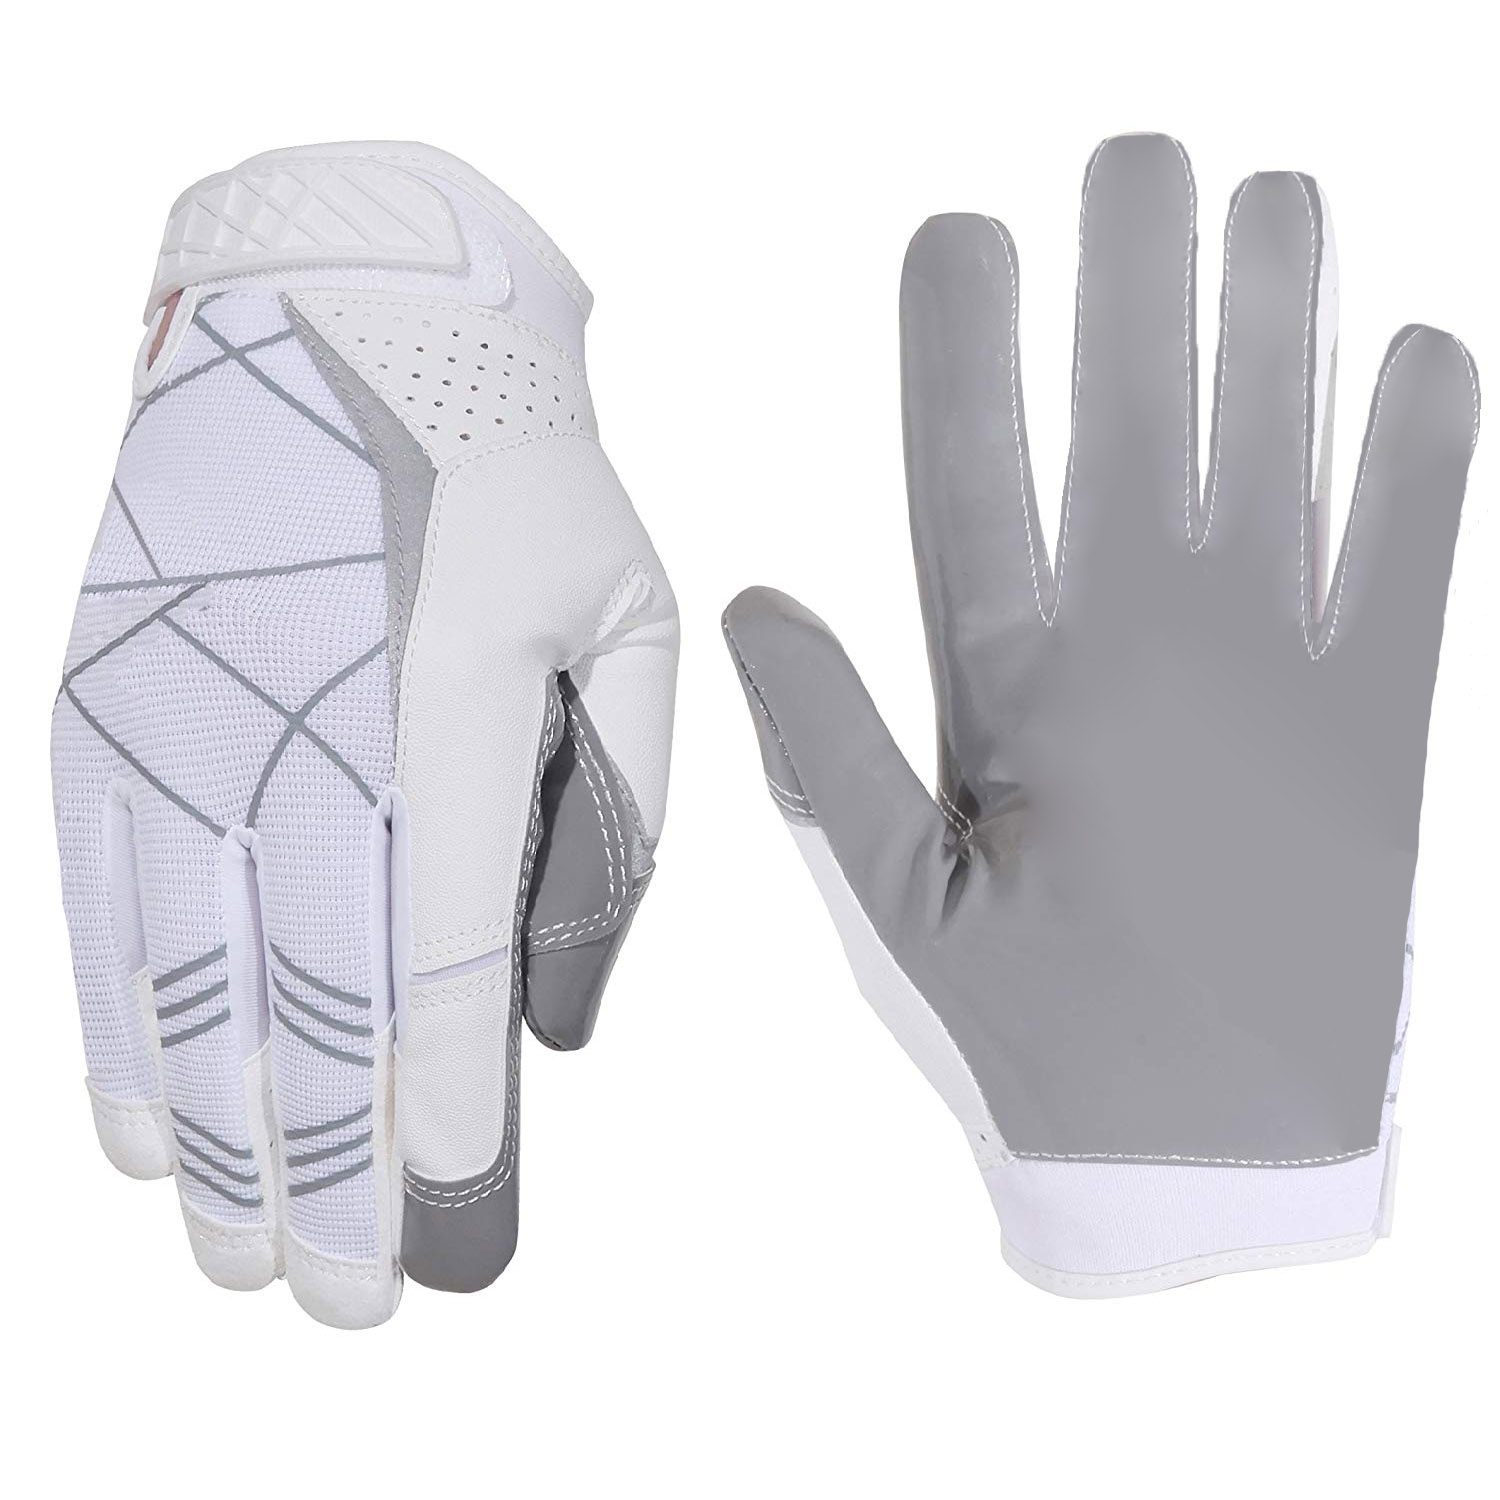 High quality american football gloves design your own football gloves